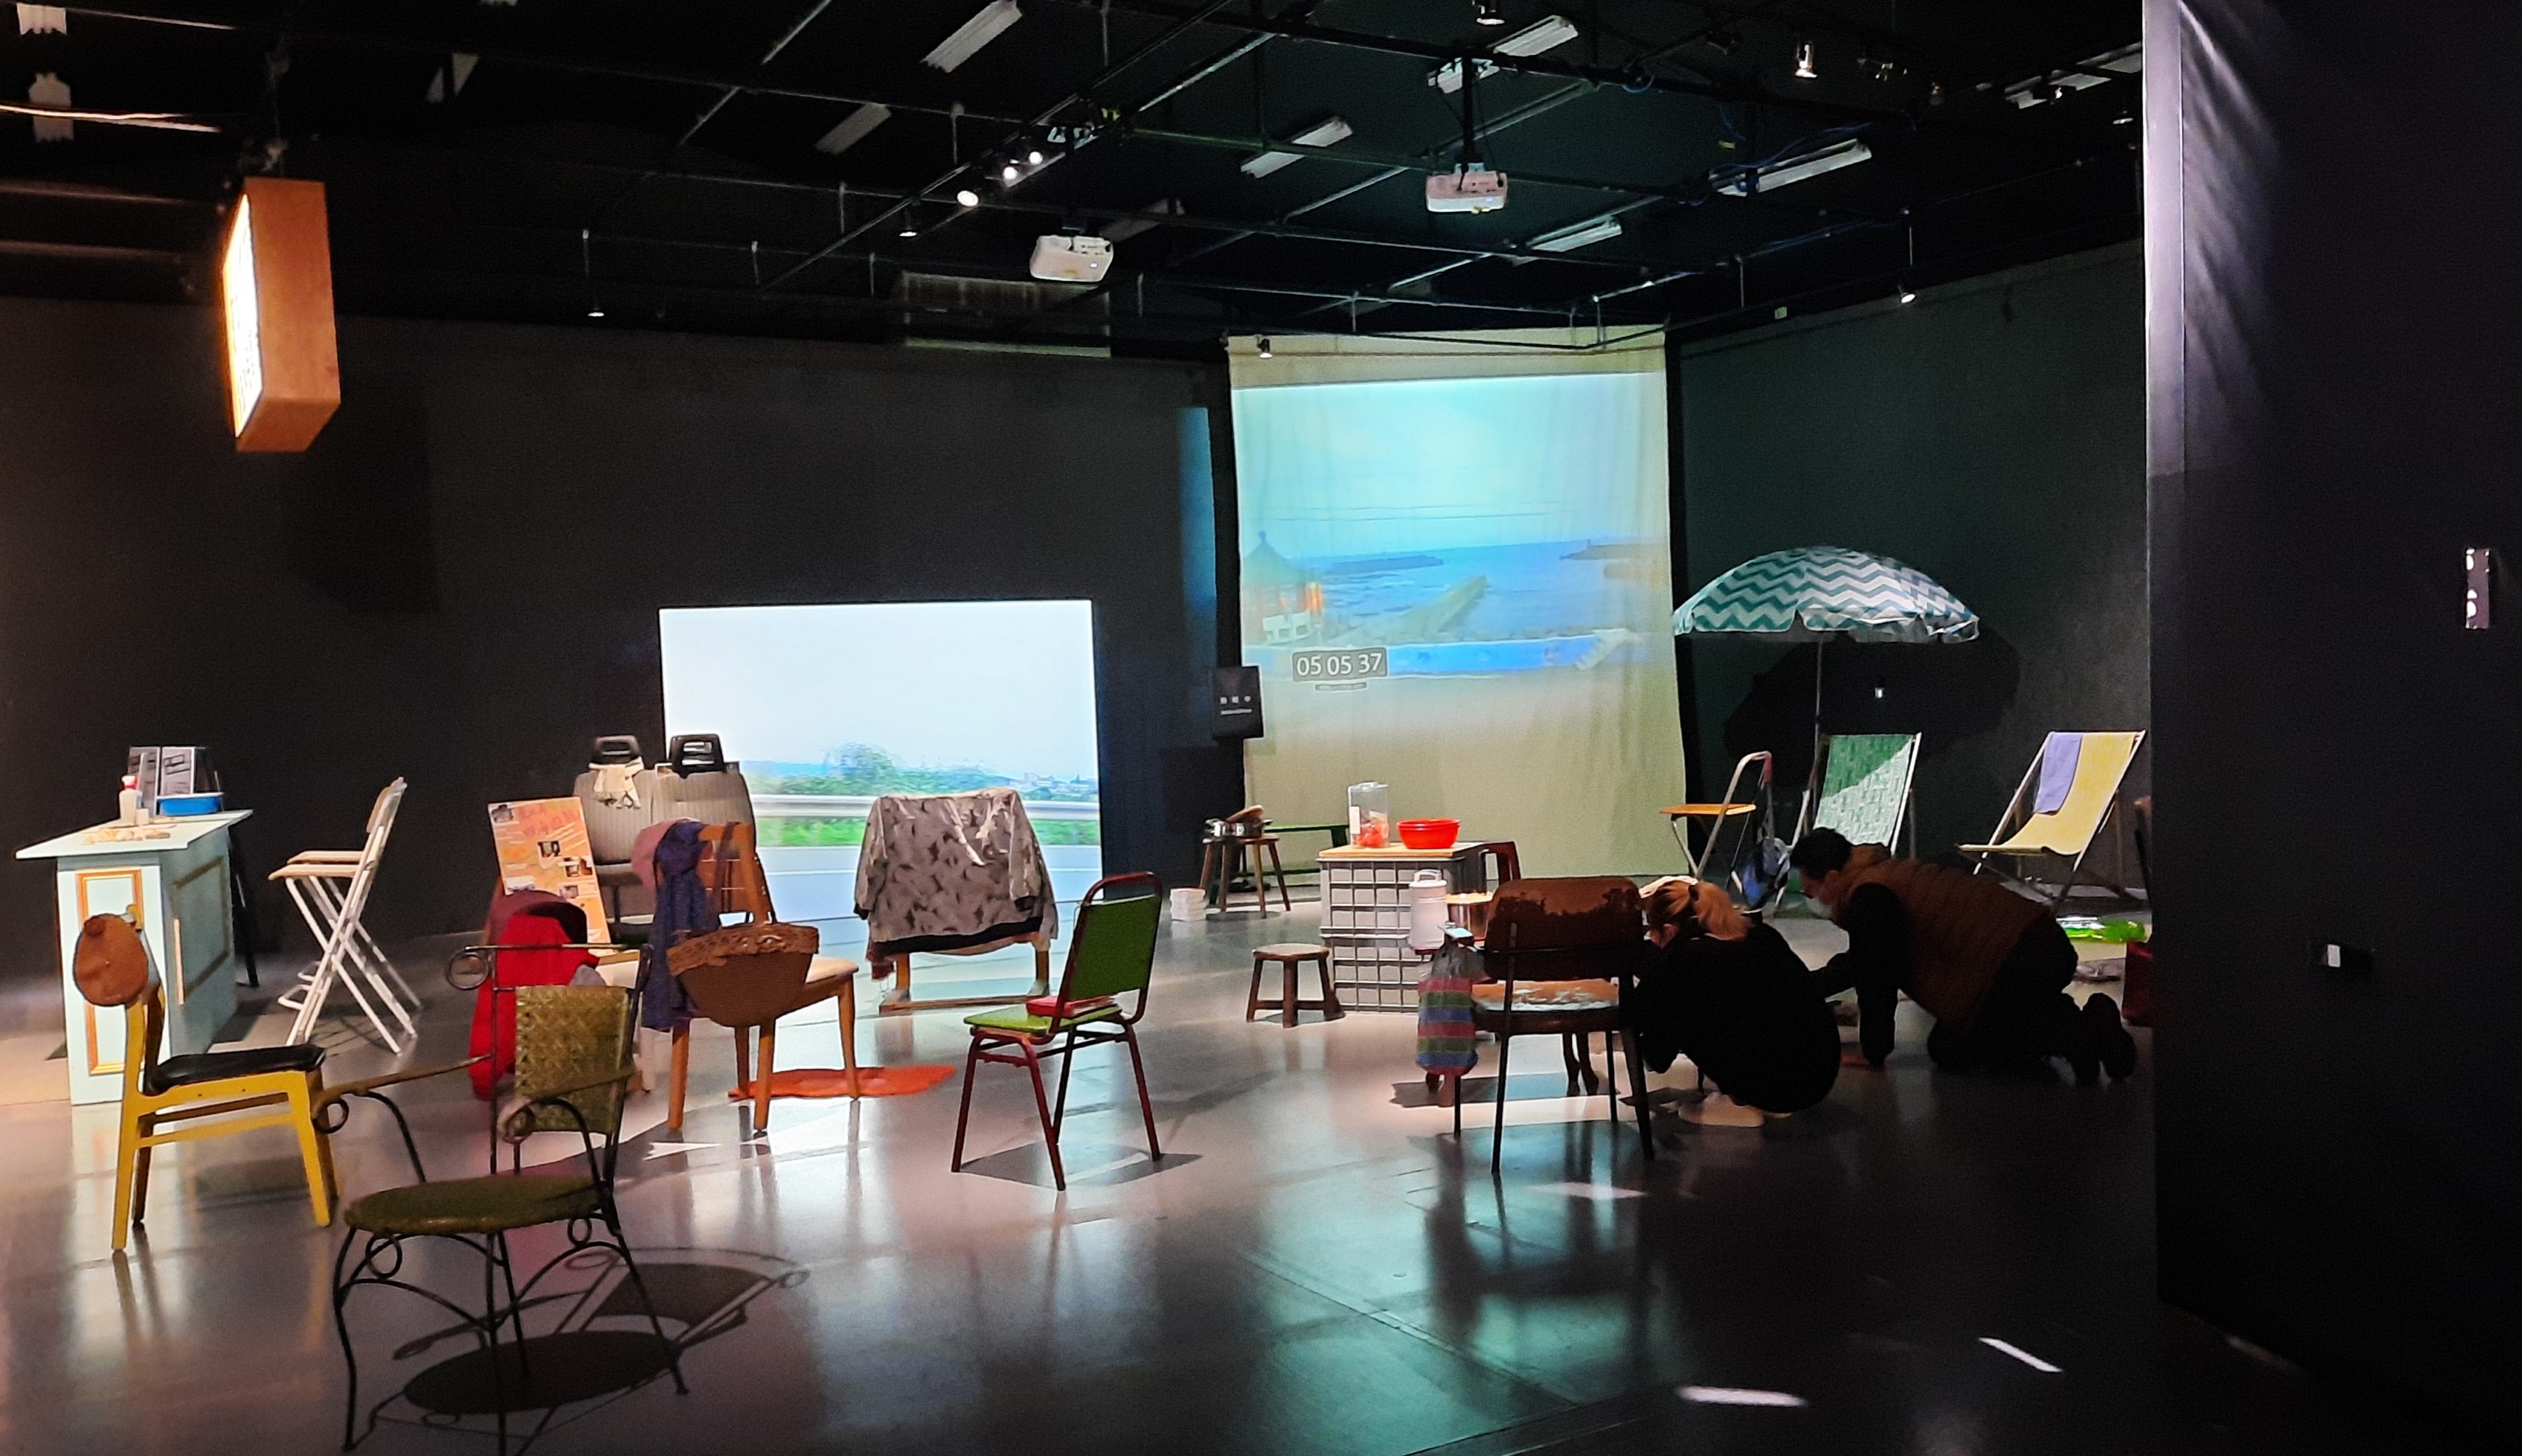 Landscape Window formed by real-time seascape and chairs.